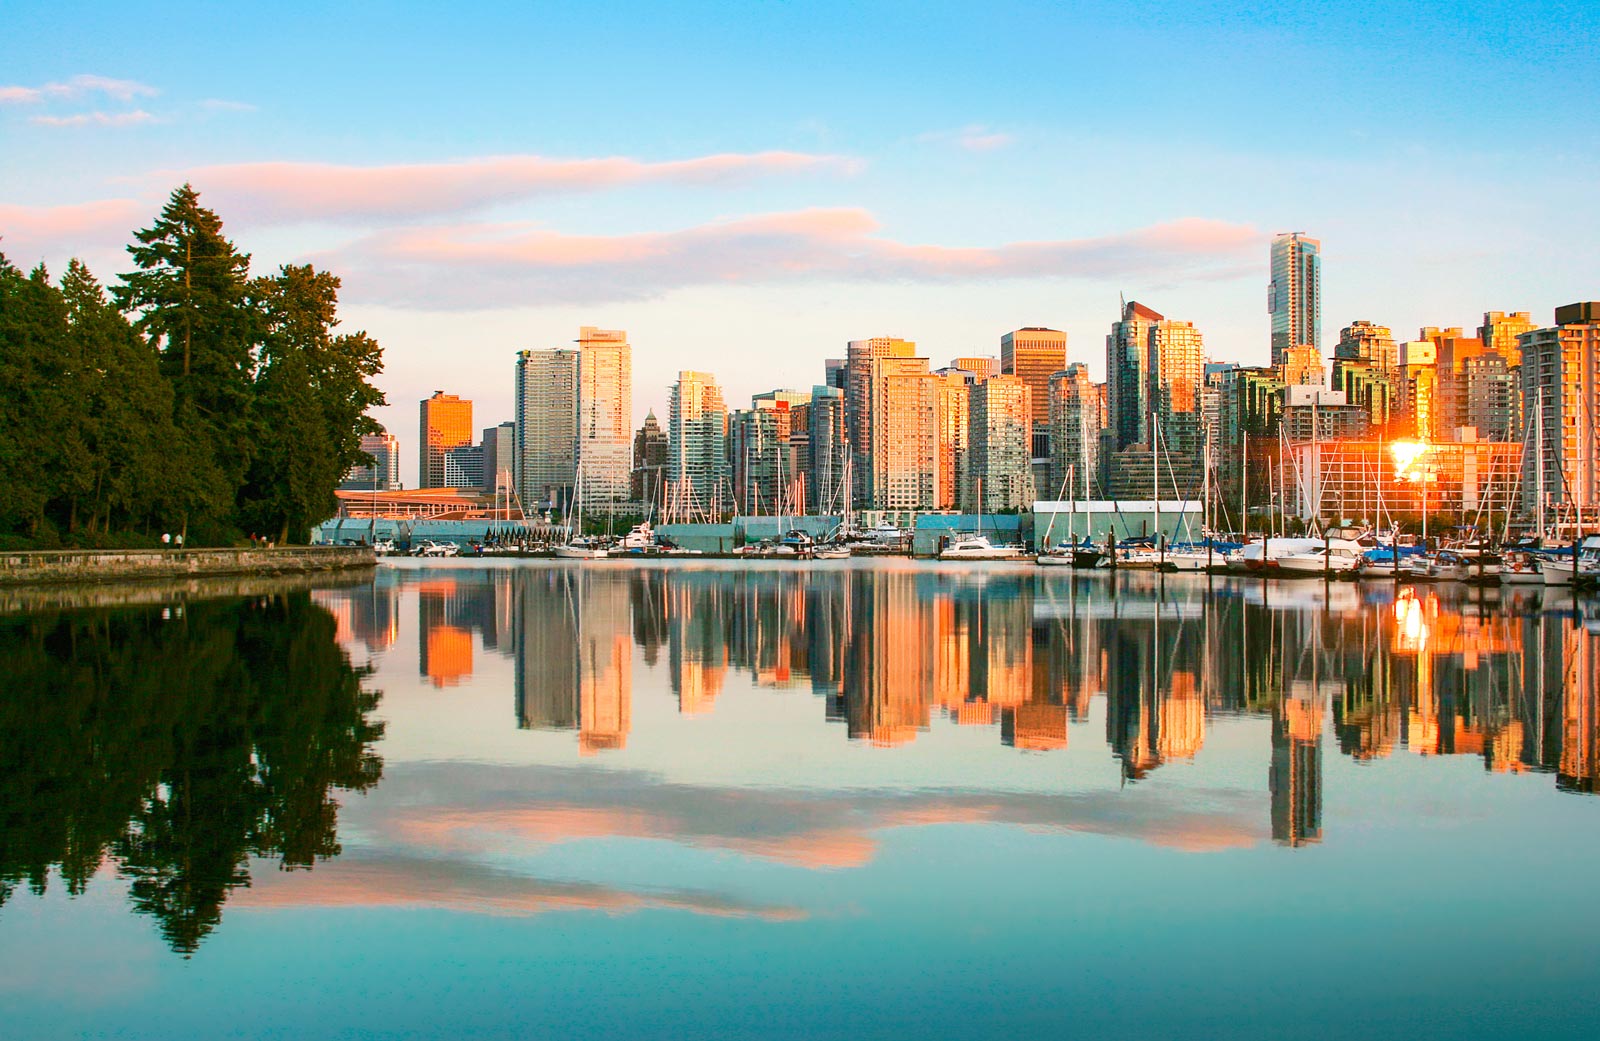 Where to Stay in Vancouver - Best Areas to Stay in 2023